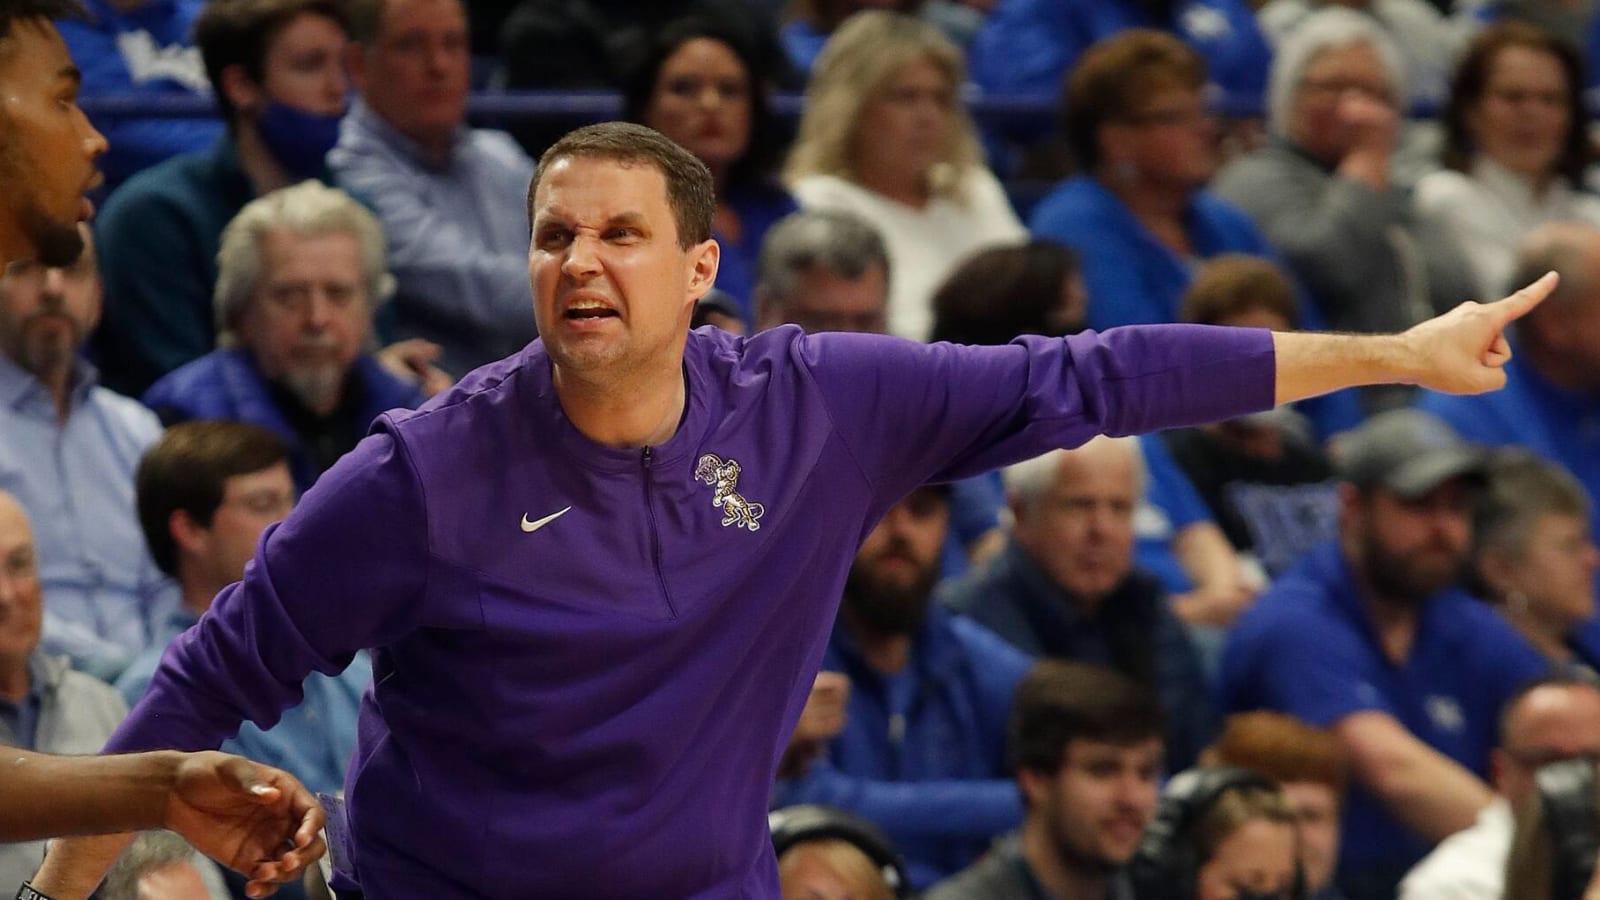 LSU fires Will Wade days after getting notice of violations